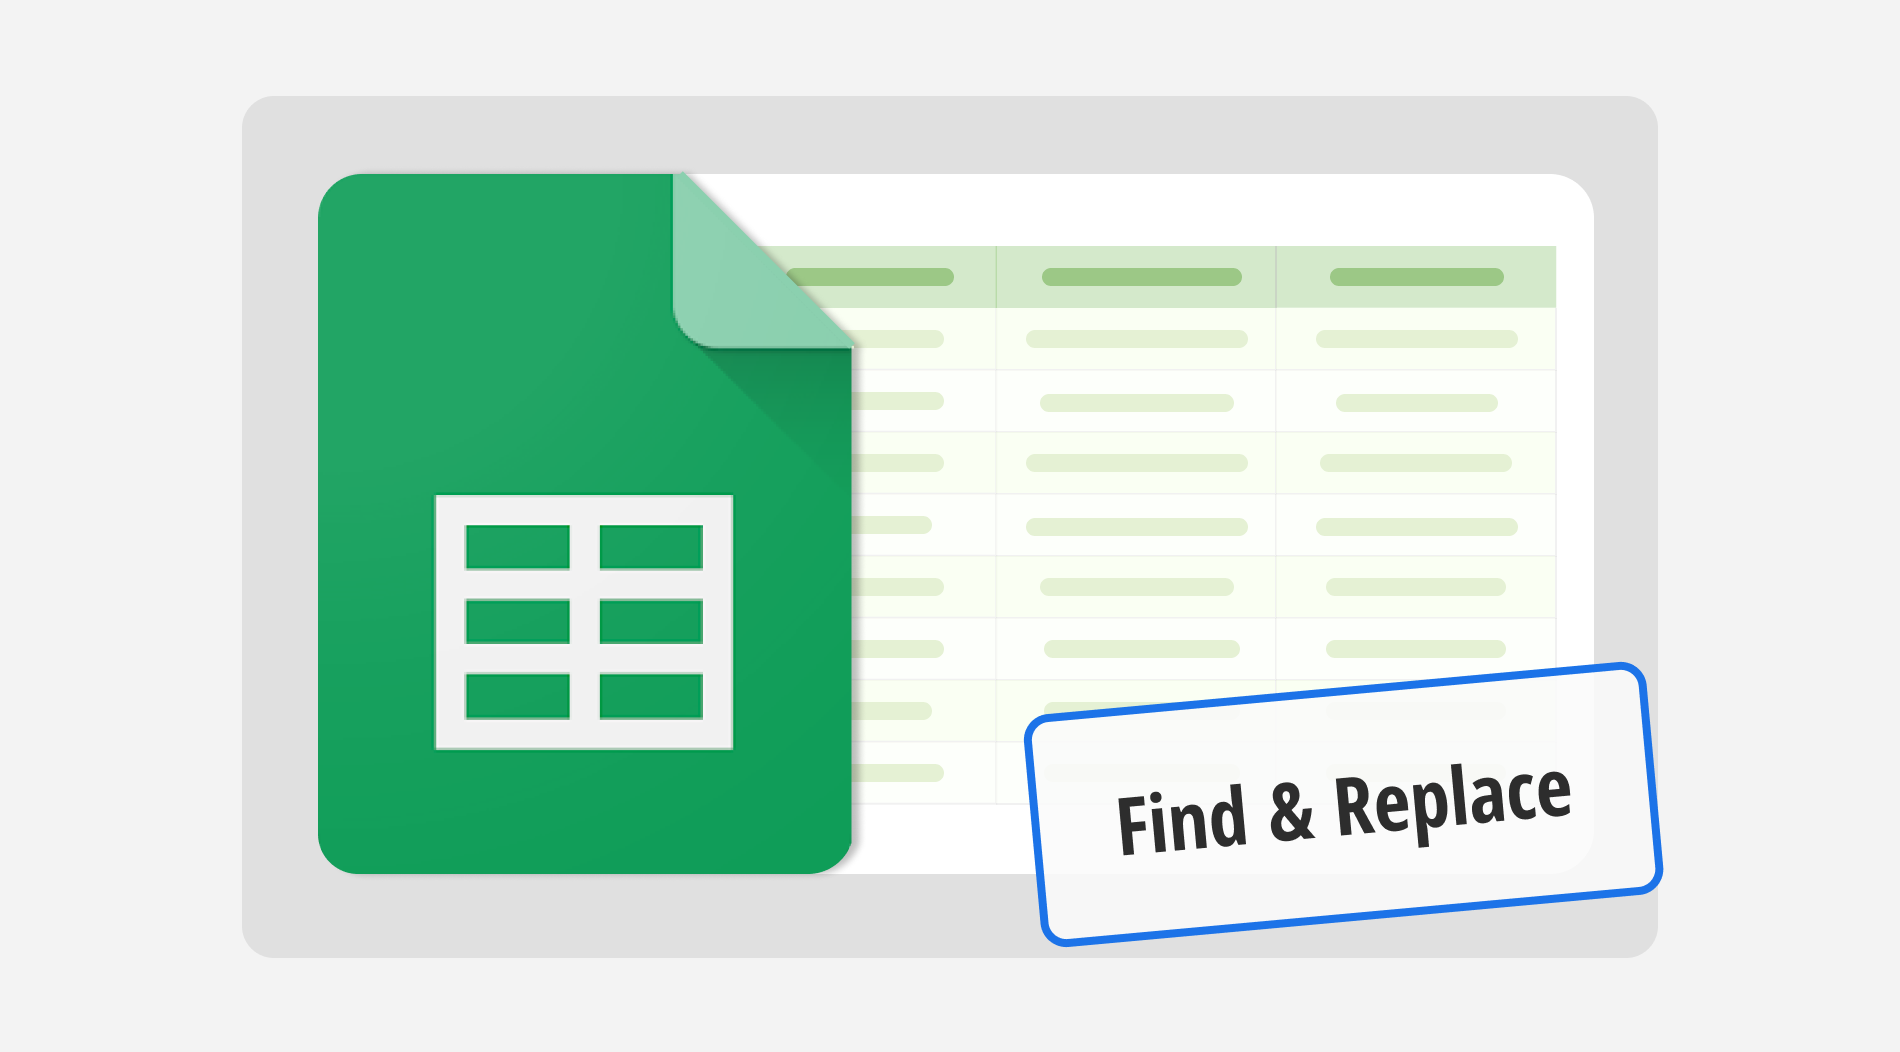 How to use find & replace in Google Sheets (Full guide)